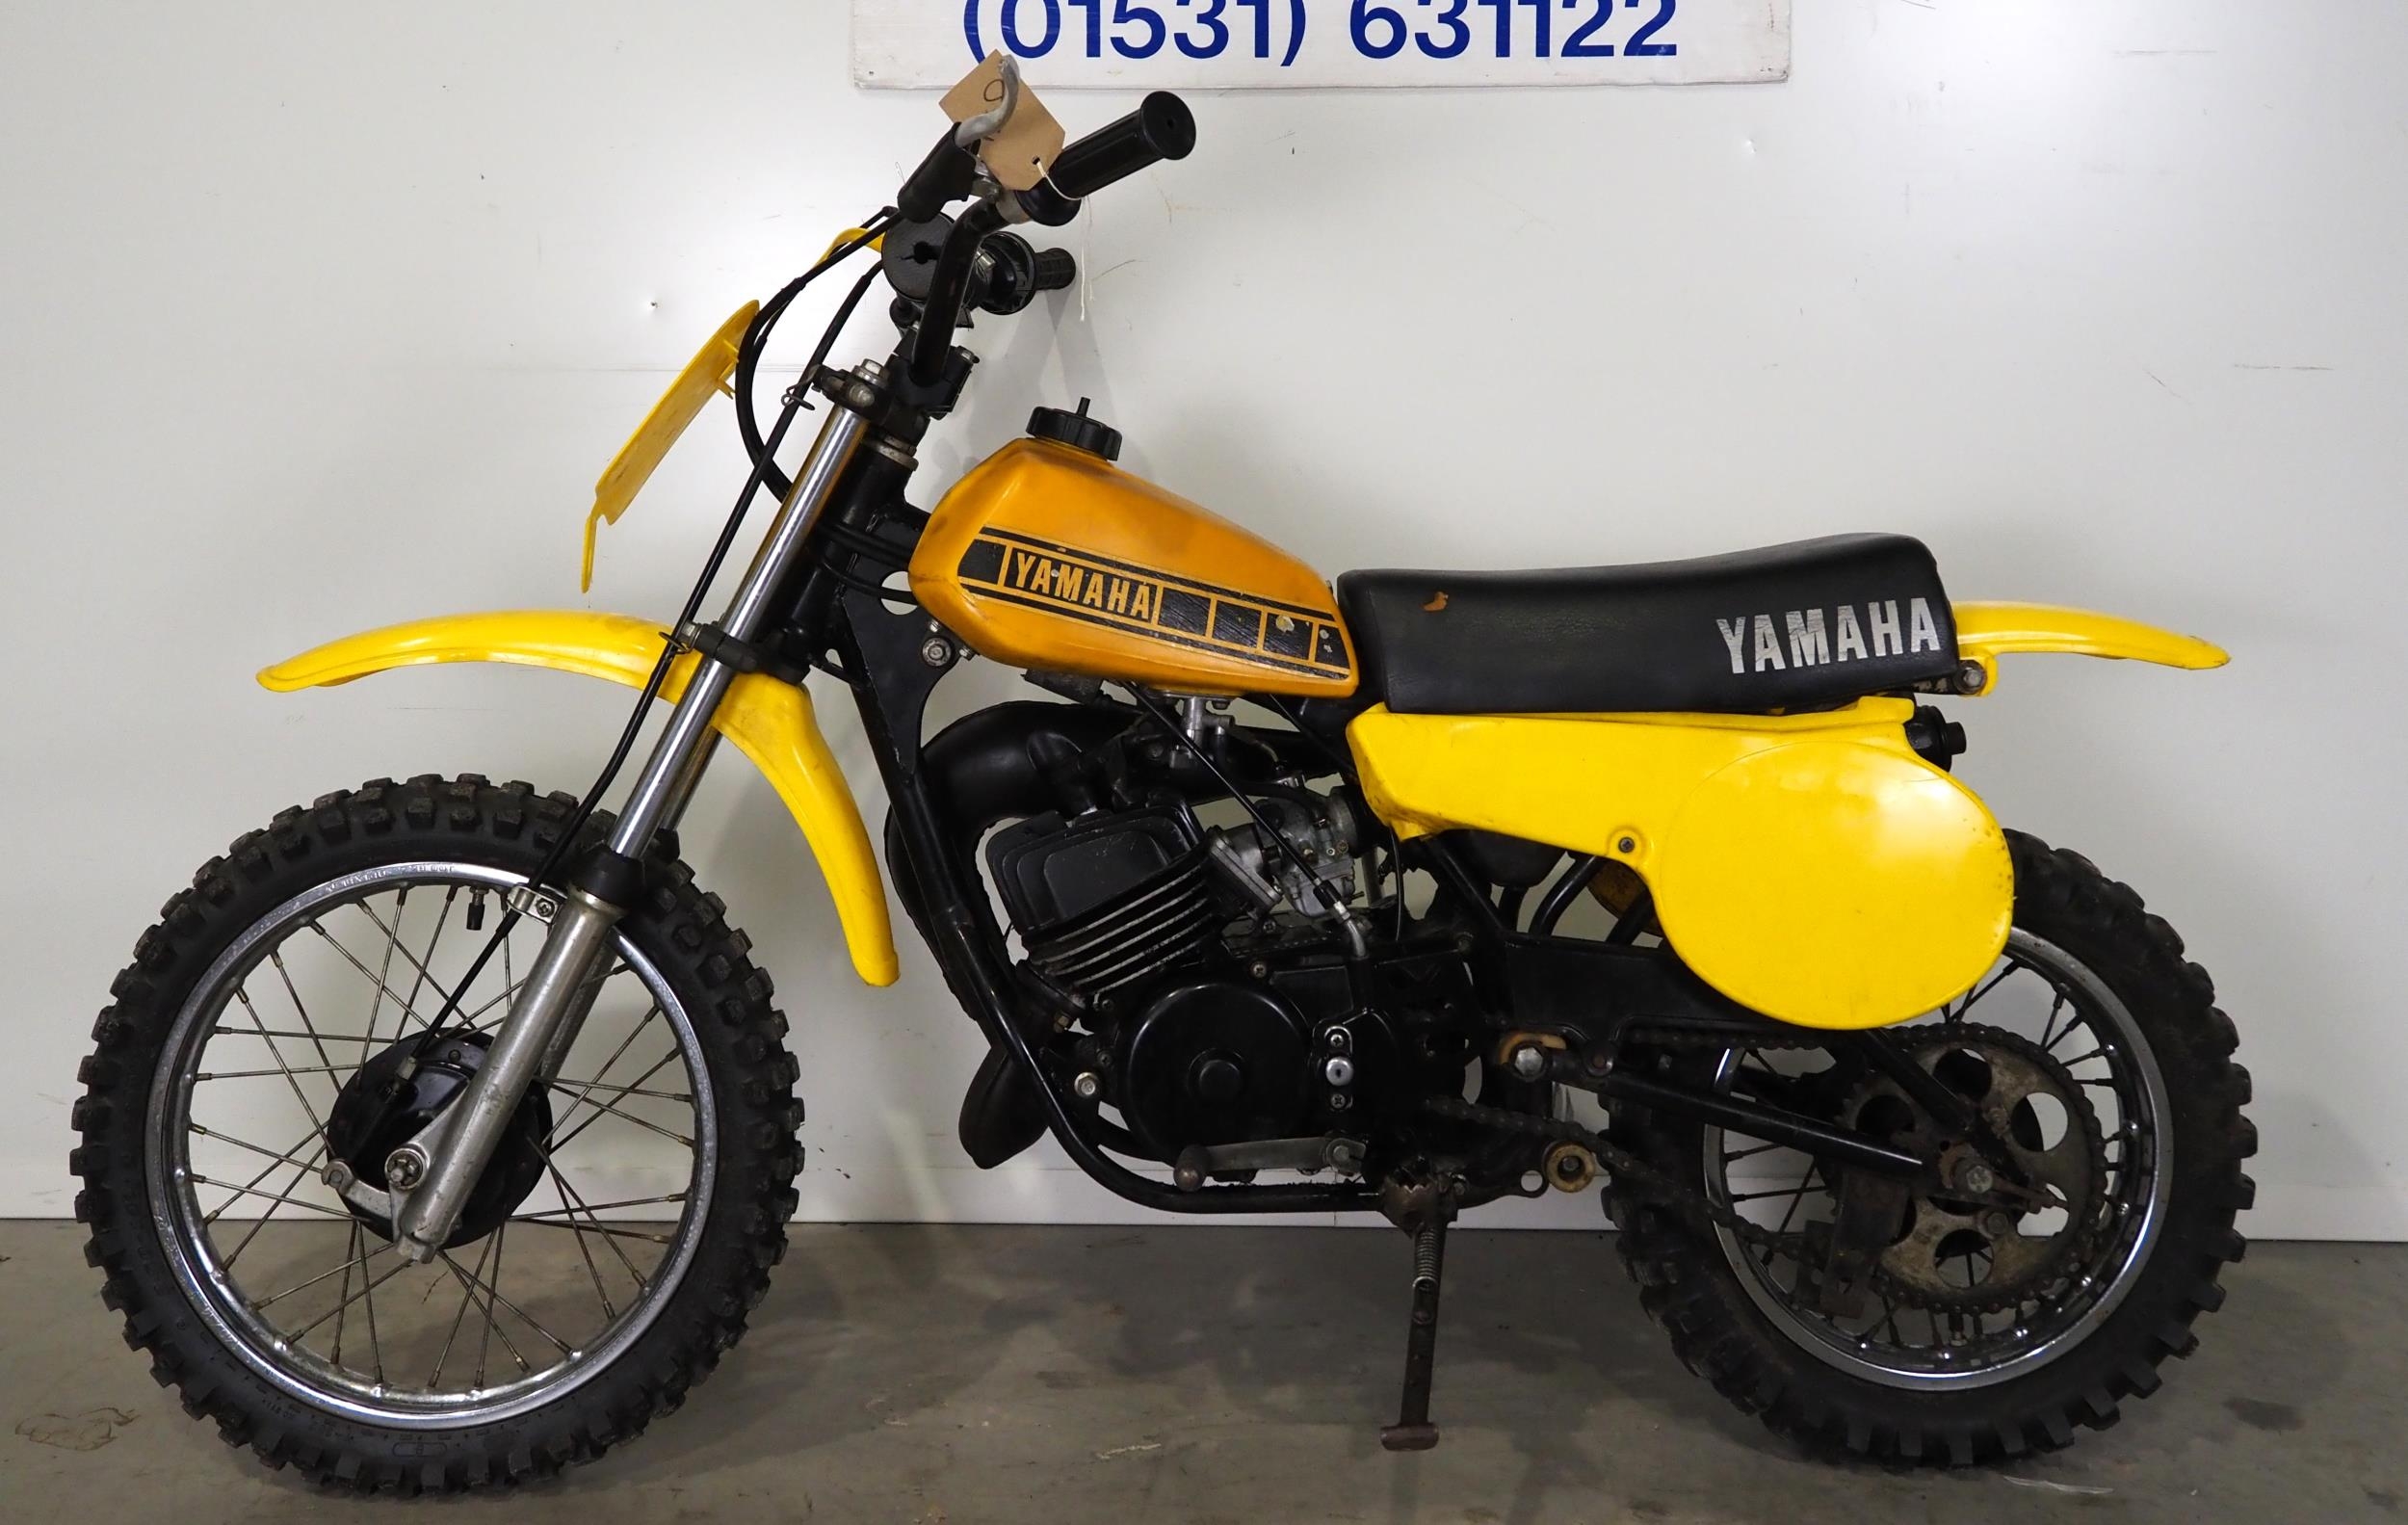 Yamaha YZ 50 motorcycle. Frame No- 3R0-003975 Runs and rides, came from a collection in Florida - Image 7 of 7